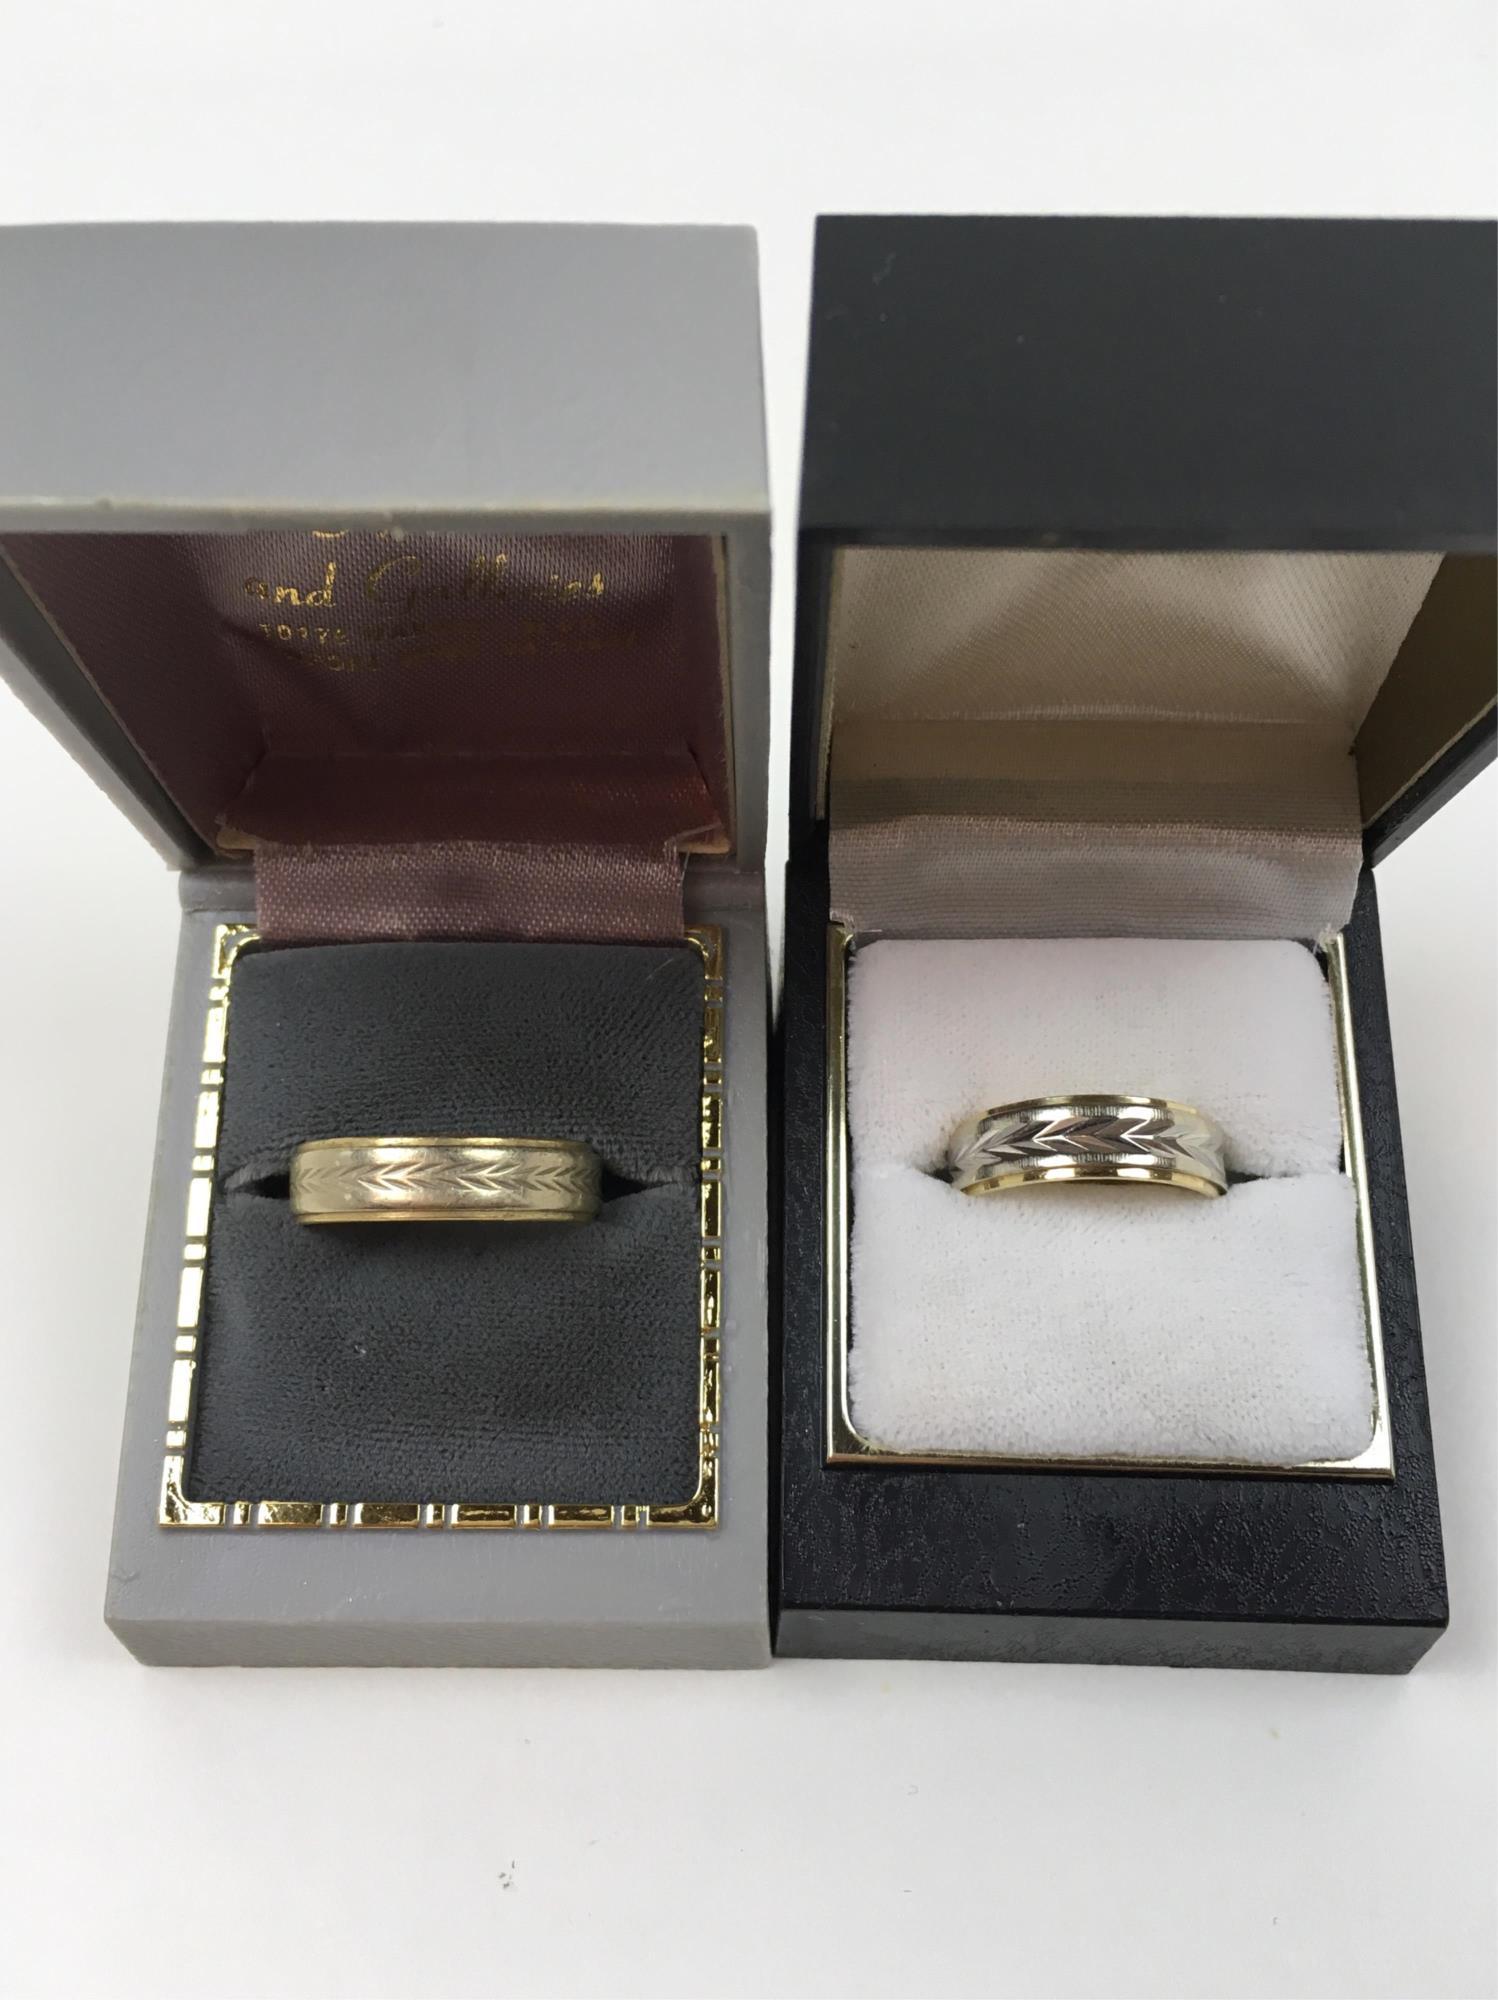 TWO 14K WEDDING BANDS